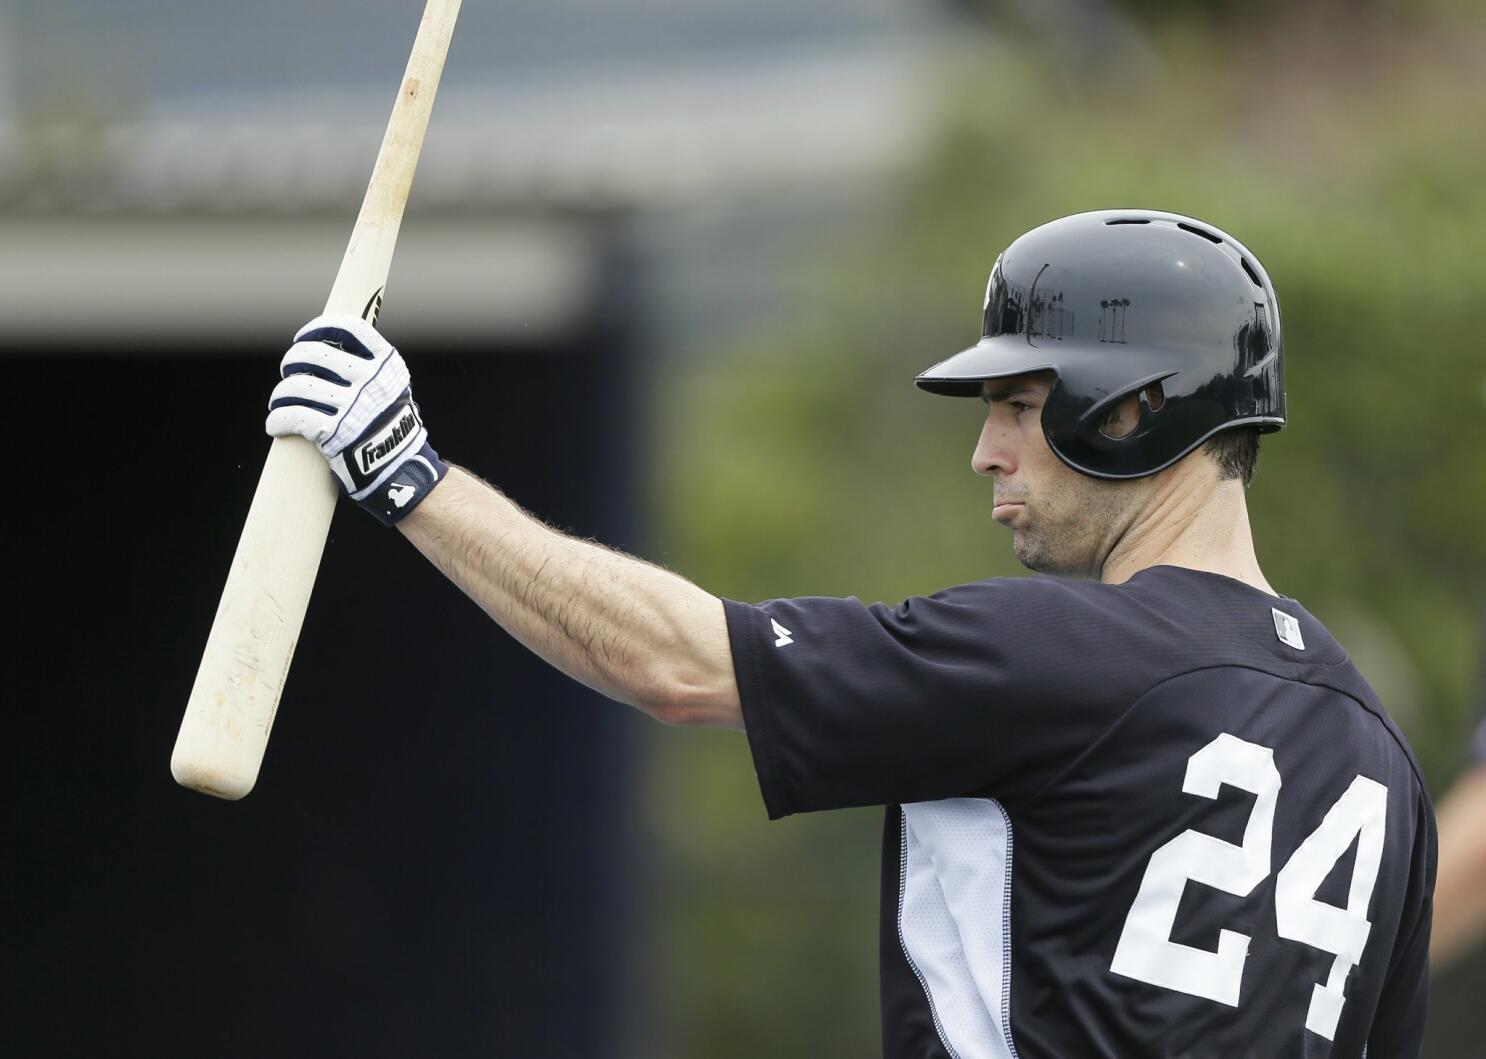 Now with Yanks, Sizemore hopes knee injuries over - The San Diego